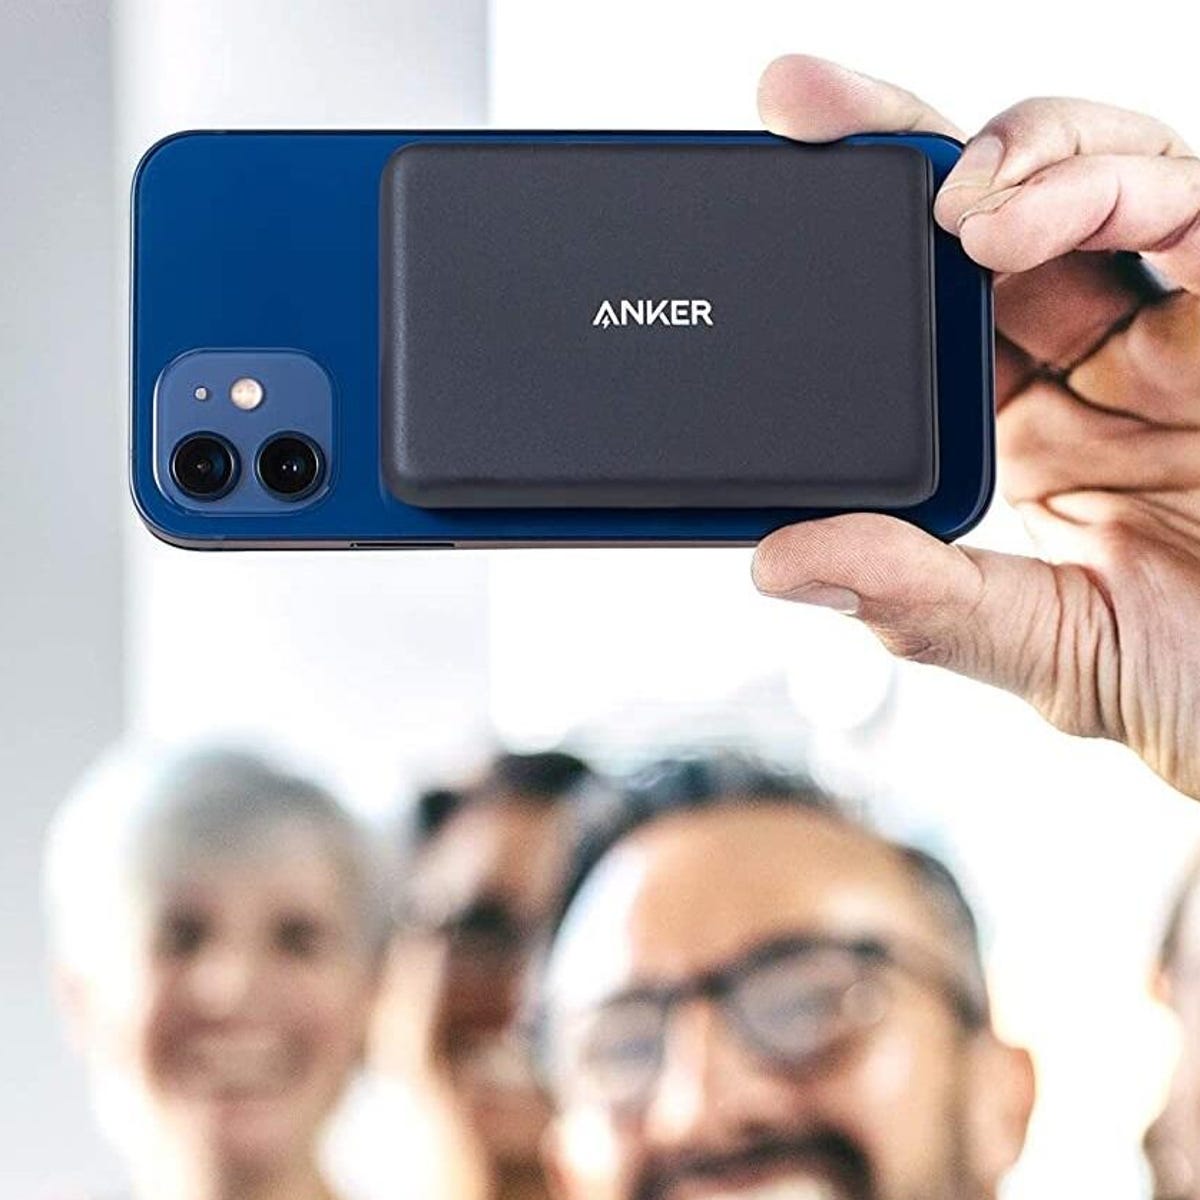 Anker's MagSafe battery pack for the iPhone 12 arrives March 3 - CNET